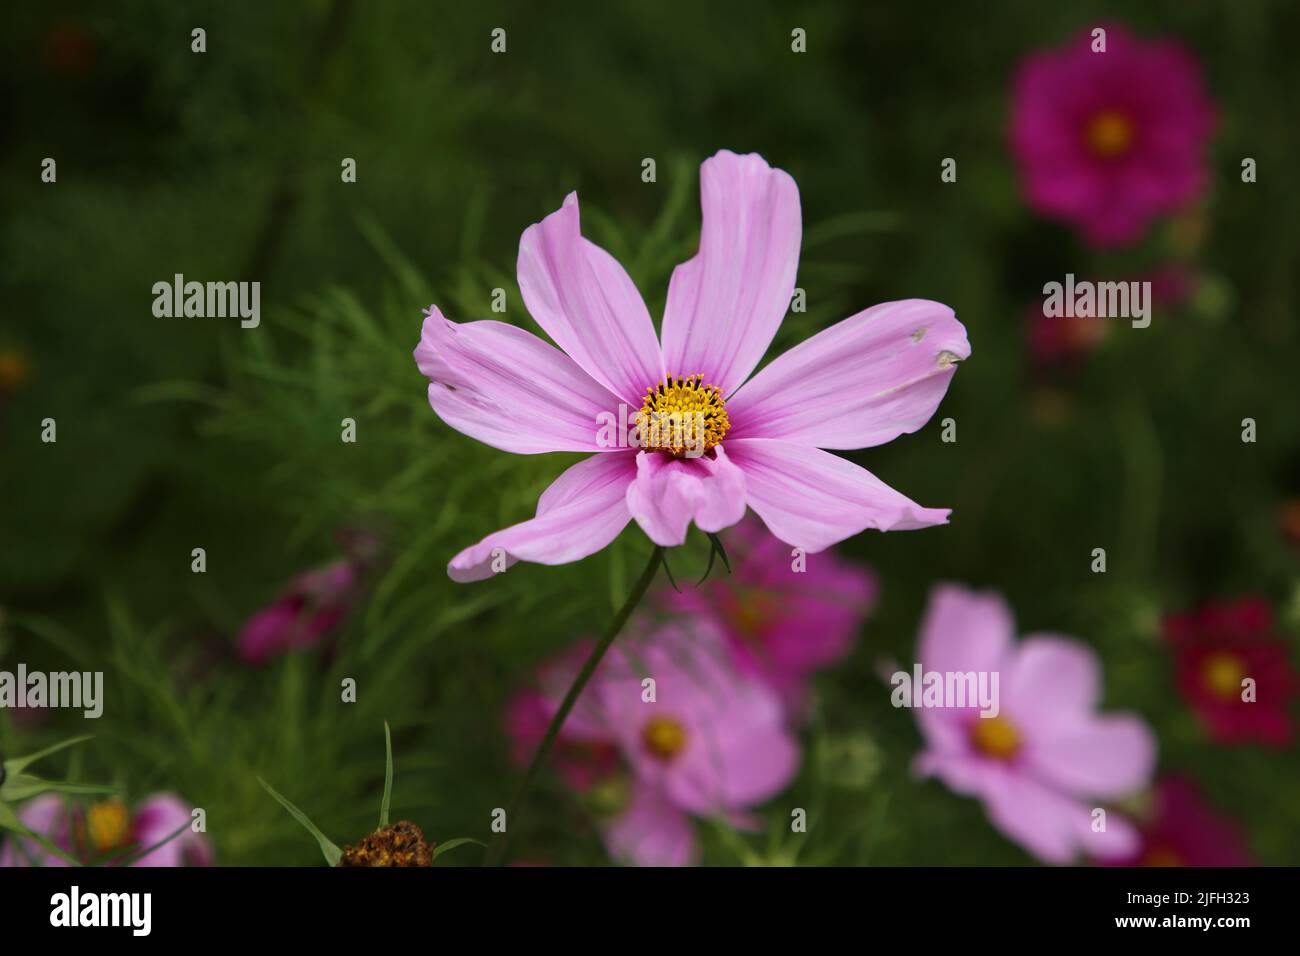 Bright pink cosmos aka aster flowers (fin: kosmos kukka) in a closeup image with some greens in the background. Beautiful spring flowers photographed. Stock Photo